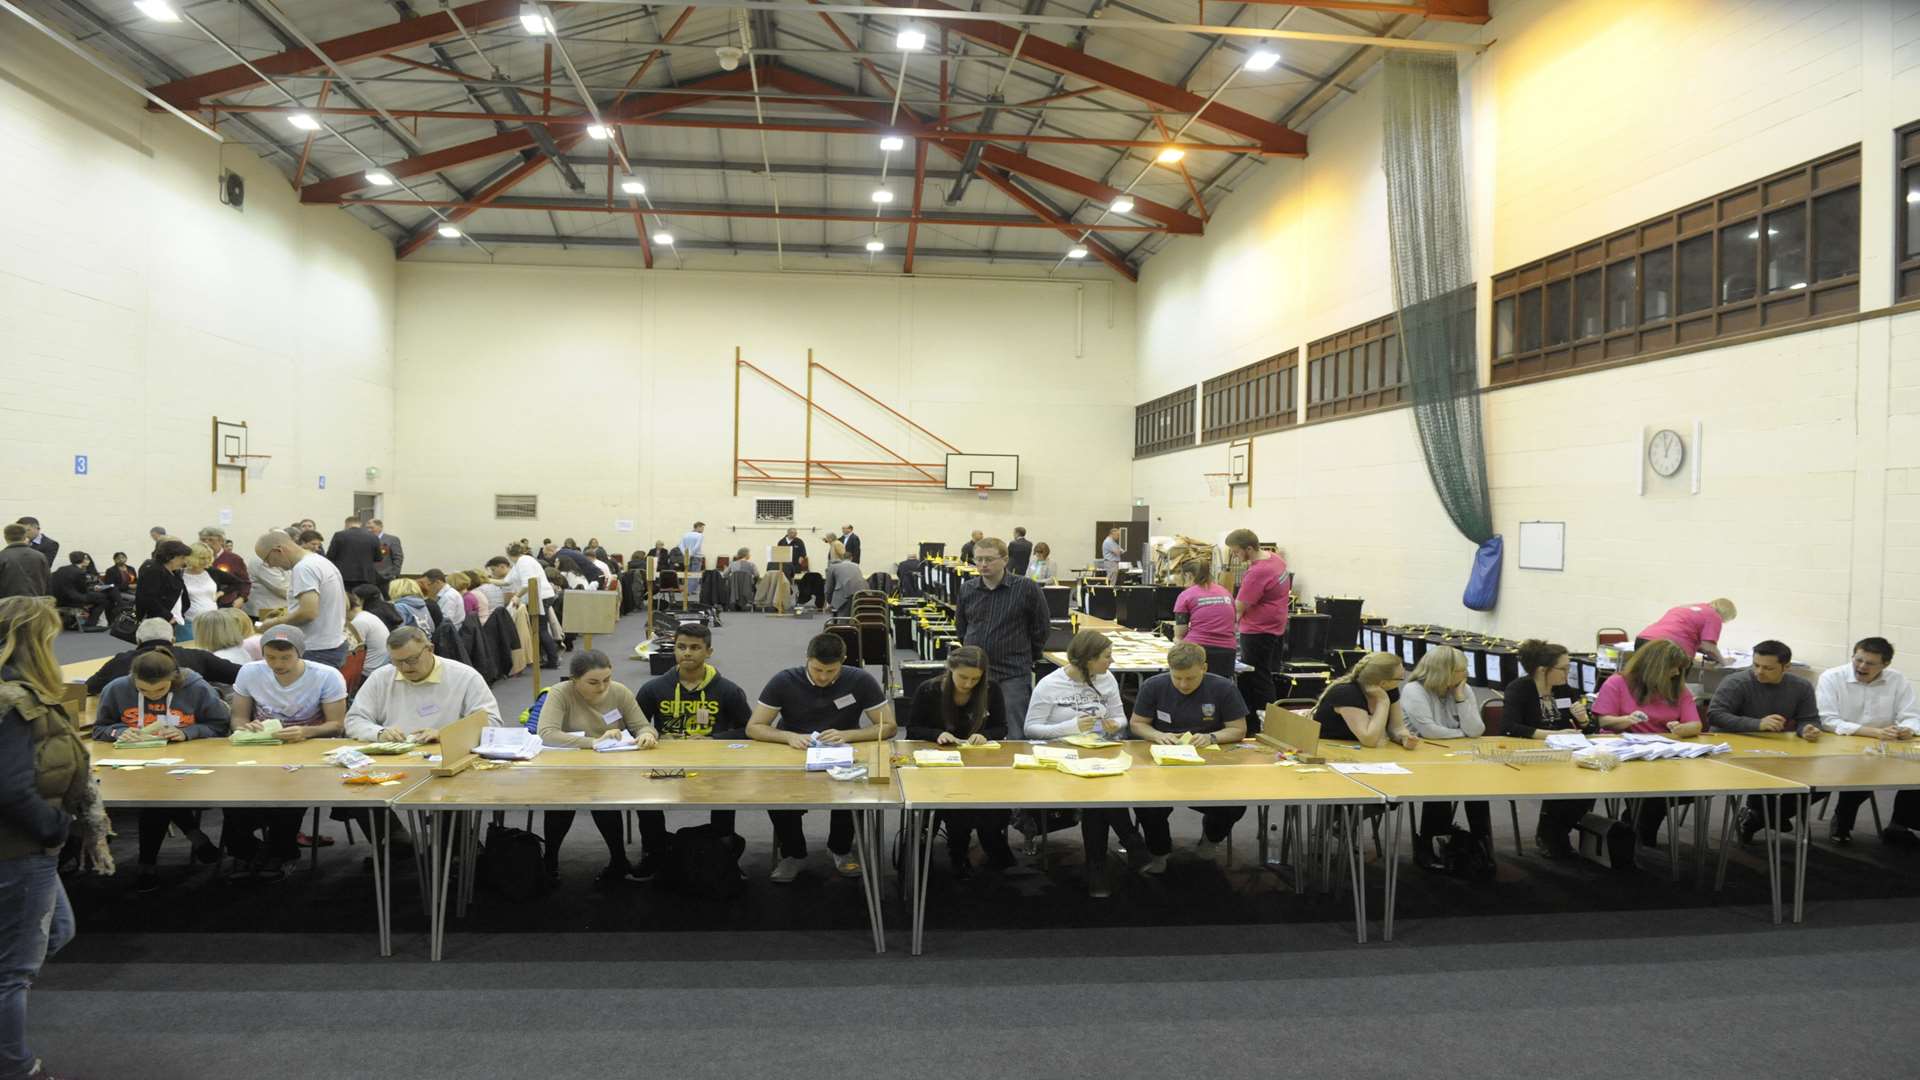 The count in Acacia Sports Hall, High Street, Dartford